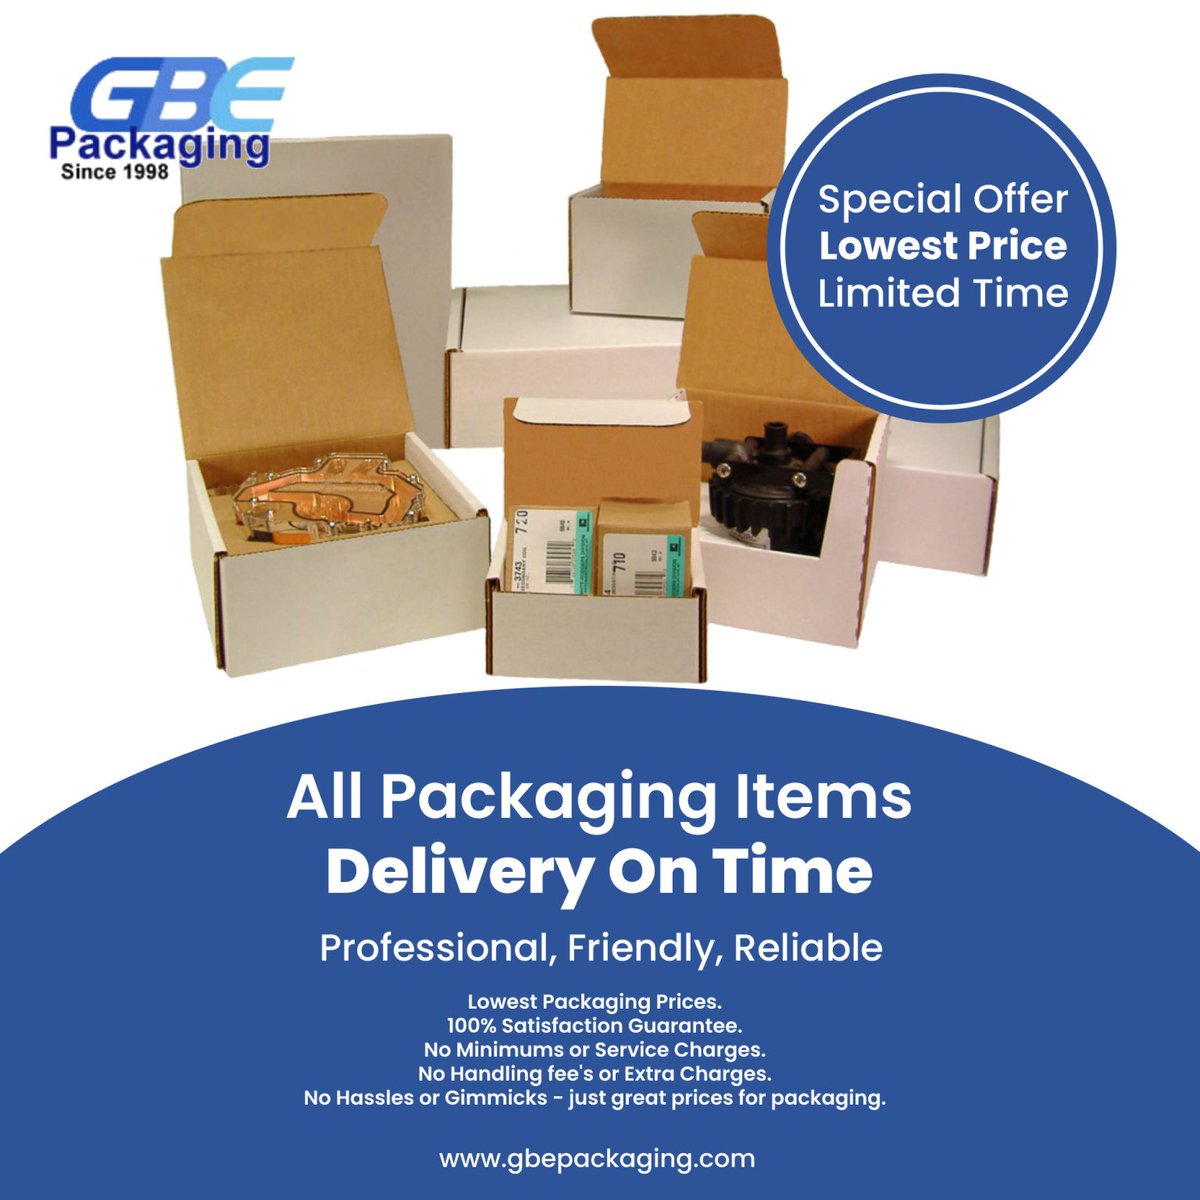 Seal the deal with GBE Packaging Supplies!  Quality packaging solutions for every shipment.

Quality Since 1998 | gbepackaging.com

#packaging #economical #LowPrice #PackagingForAll #cheap #wholesale #ecommerce #PackagingInnovation #GBEPackaging #PartnersInSuccess